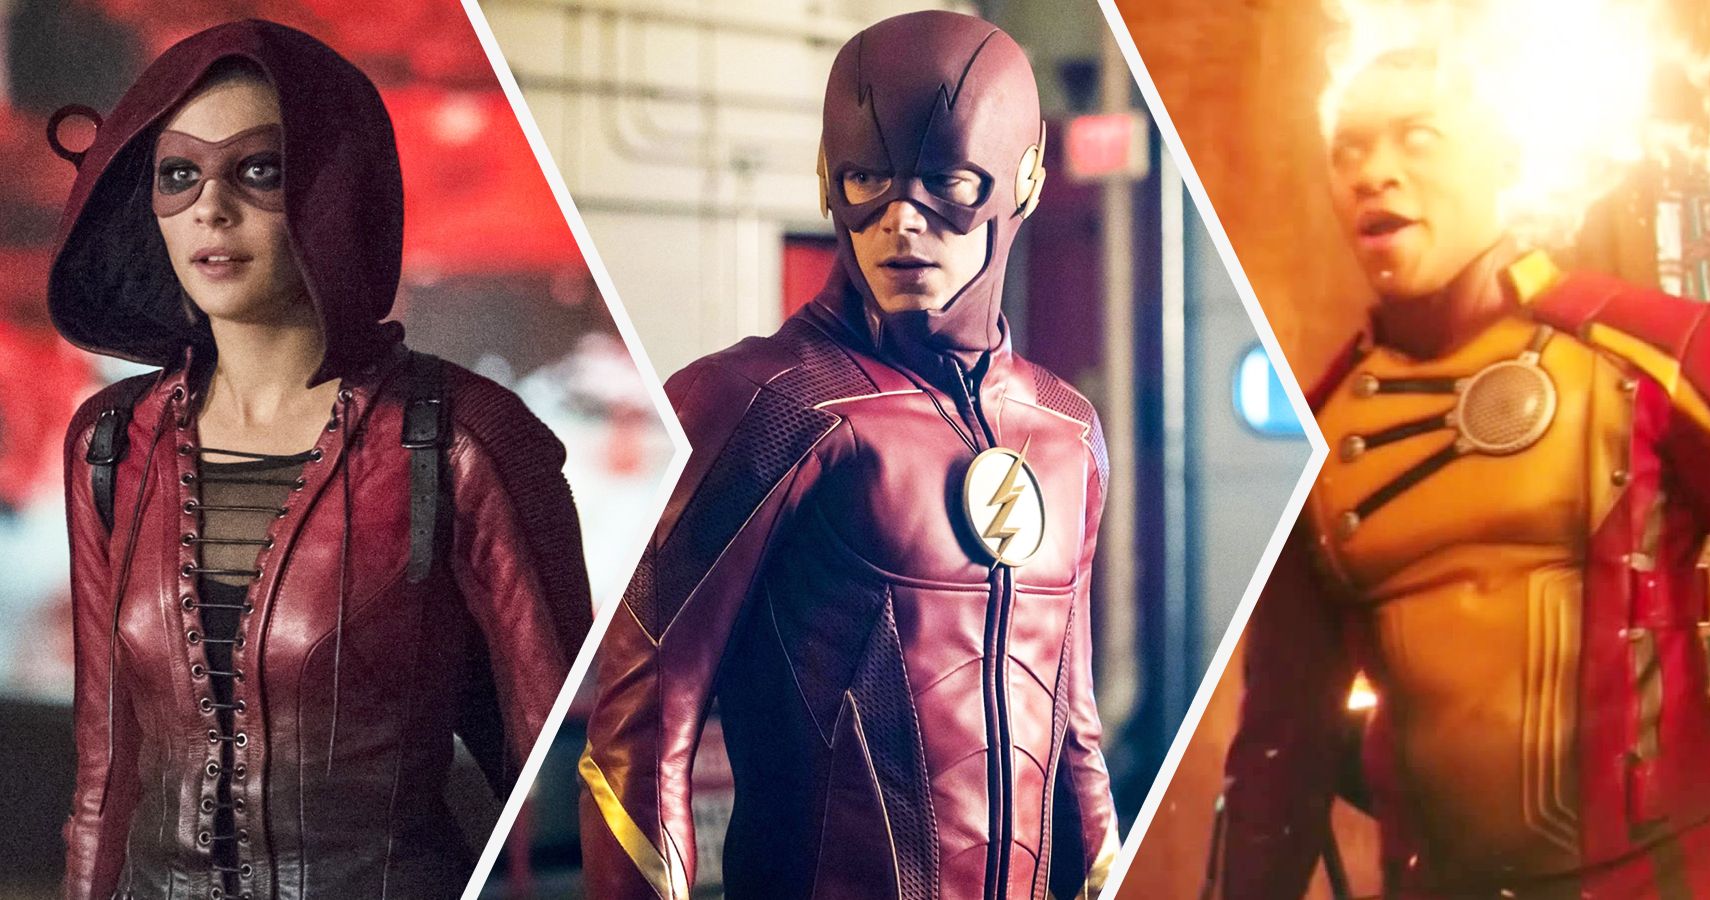 Legends In The Making: Every Arrowerse Hero, Ranked